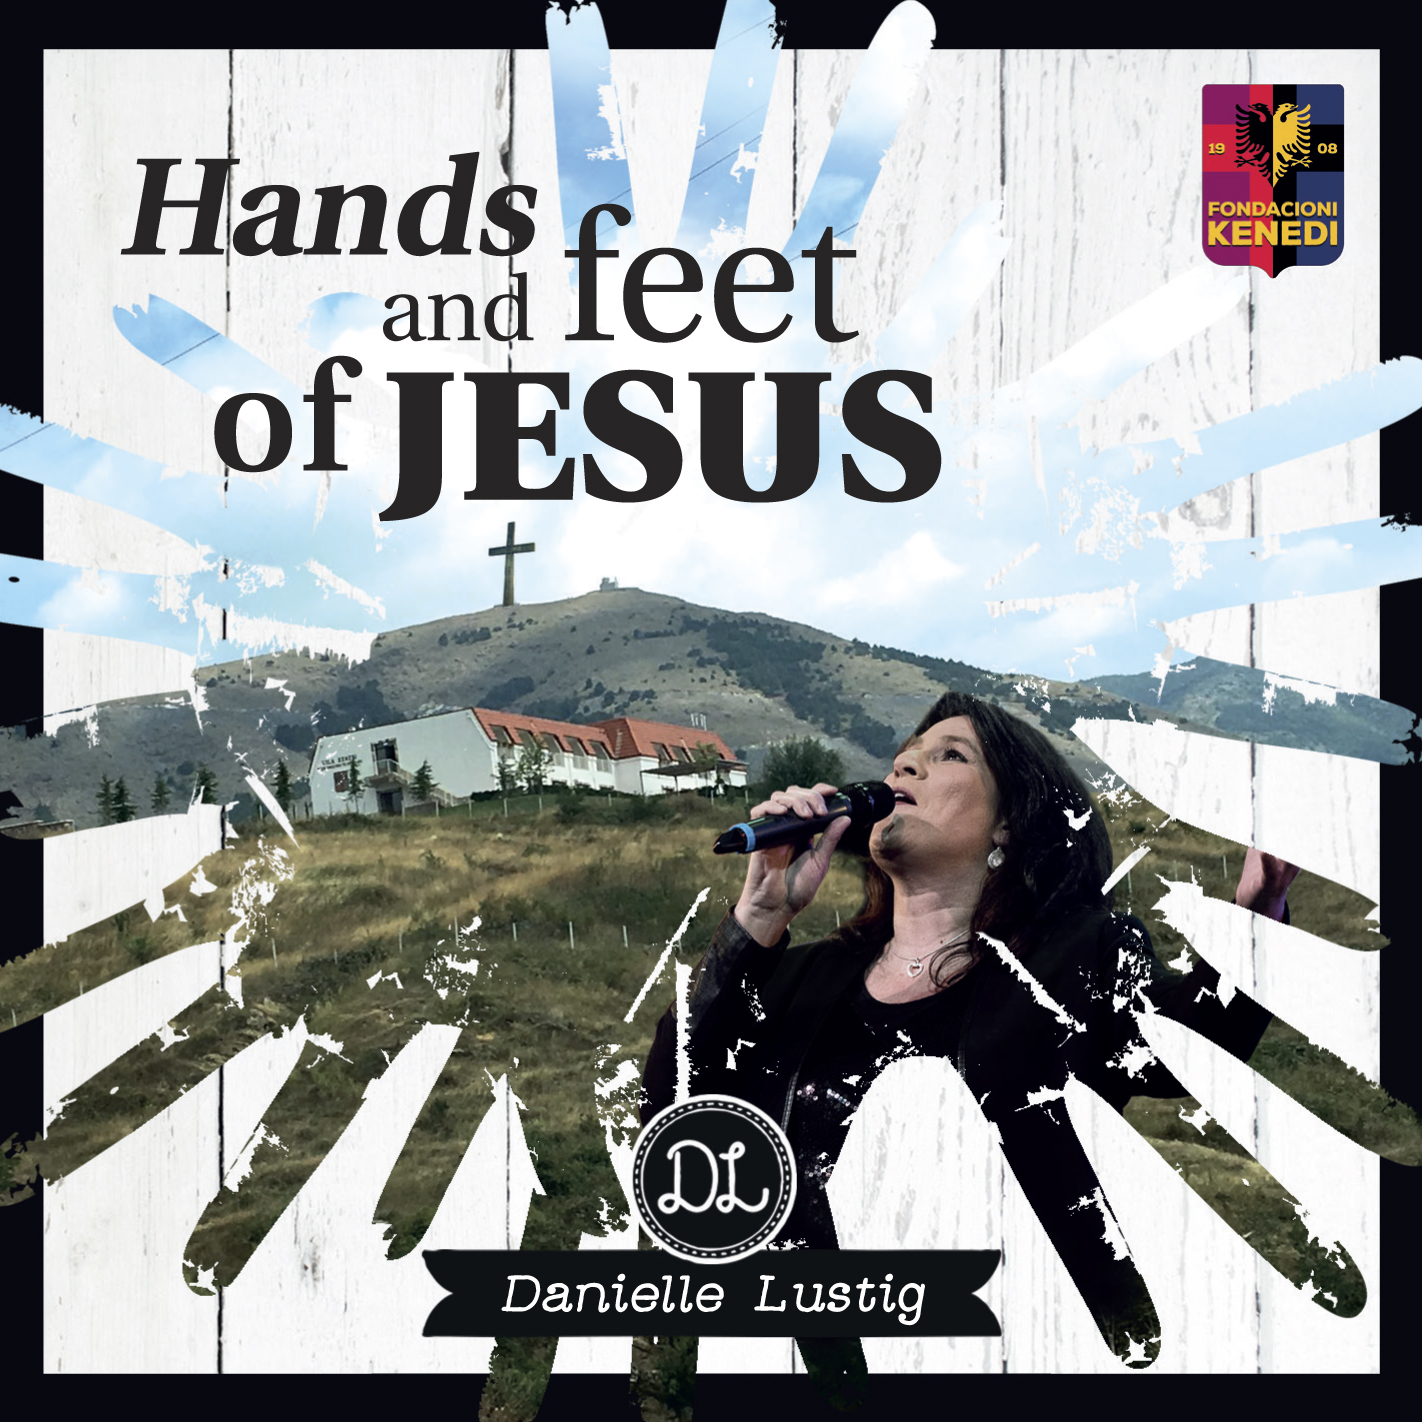 Hands and feet of Jesus